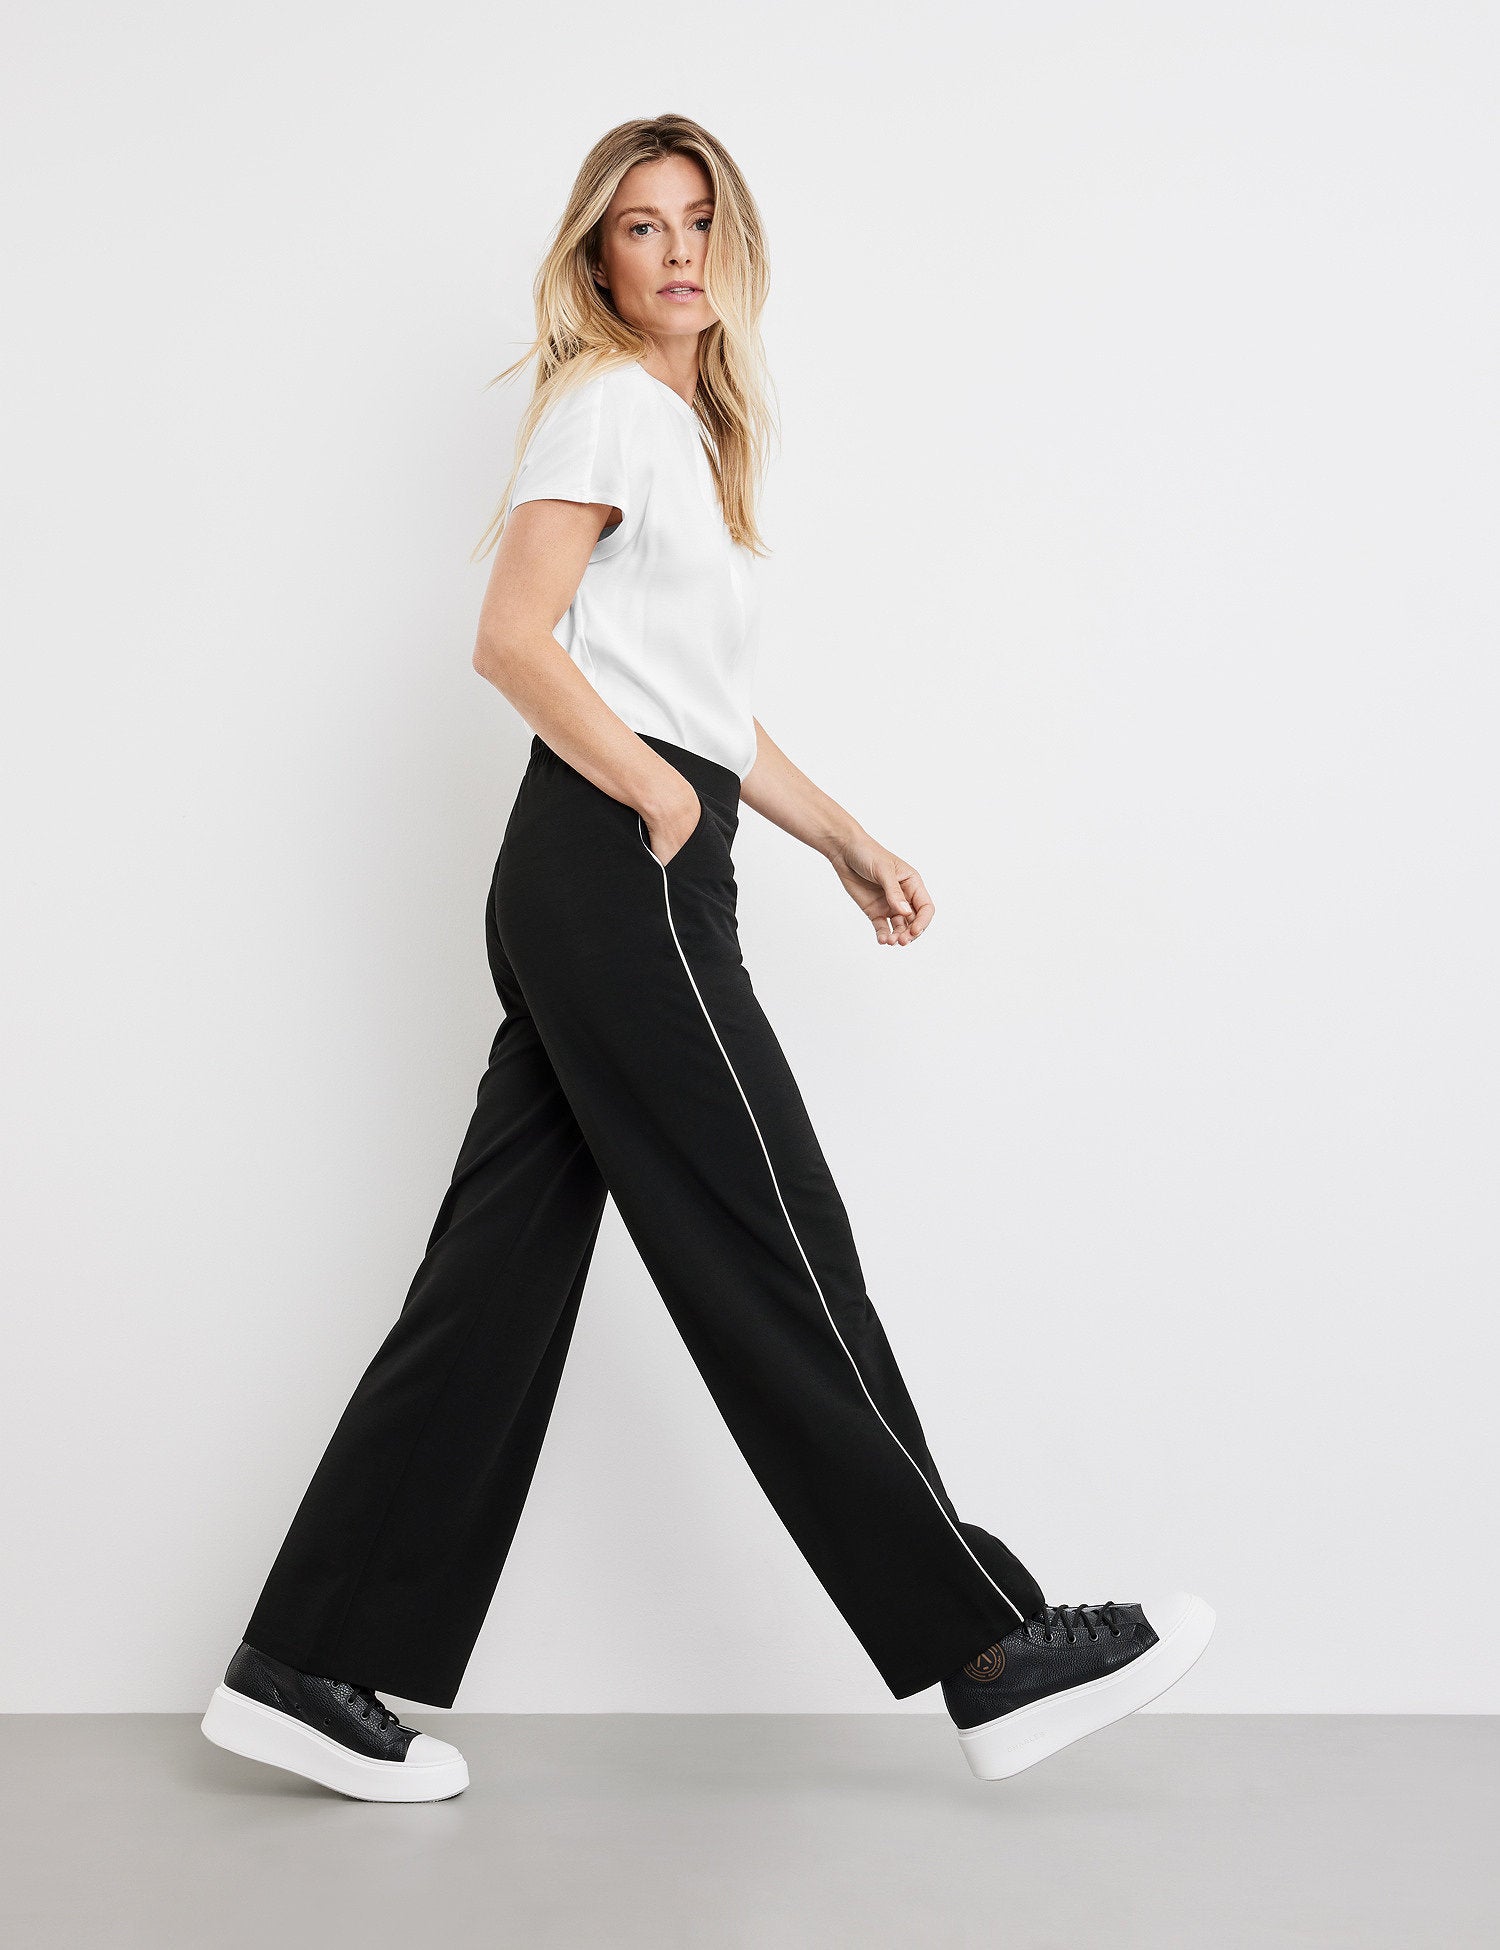 Slip-On Trousers With Side Piping_925009-35031_11000_05